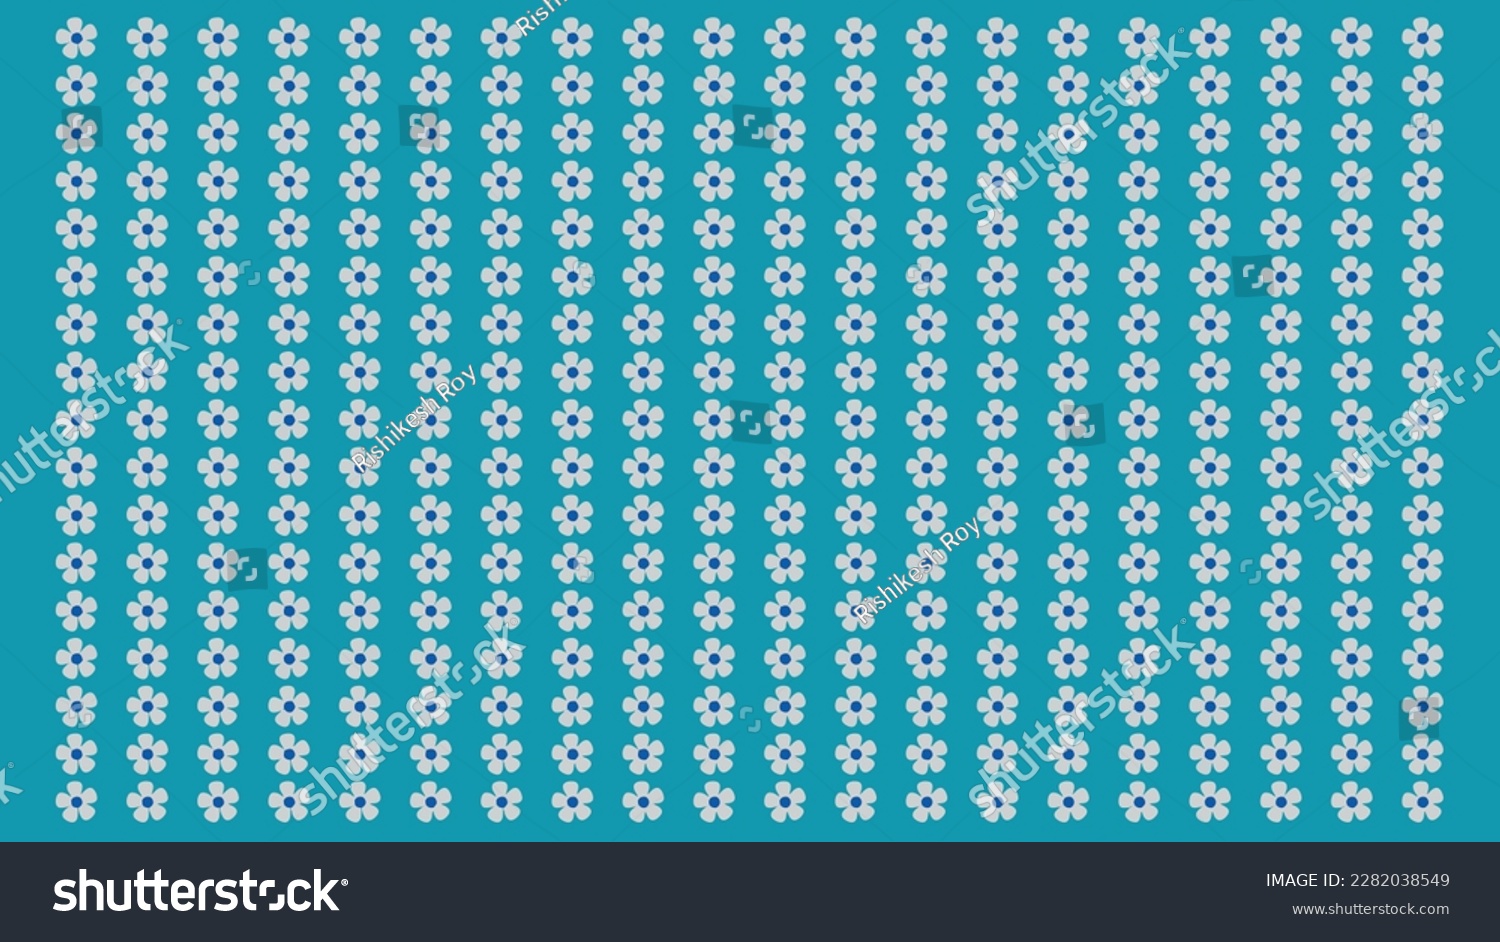 SVG of This vector background features a solid colored deepest layer with neatly arranged white-blue daisy flowers, perfect for use as a desktop or other purposes. svg